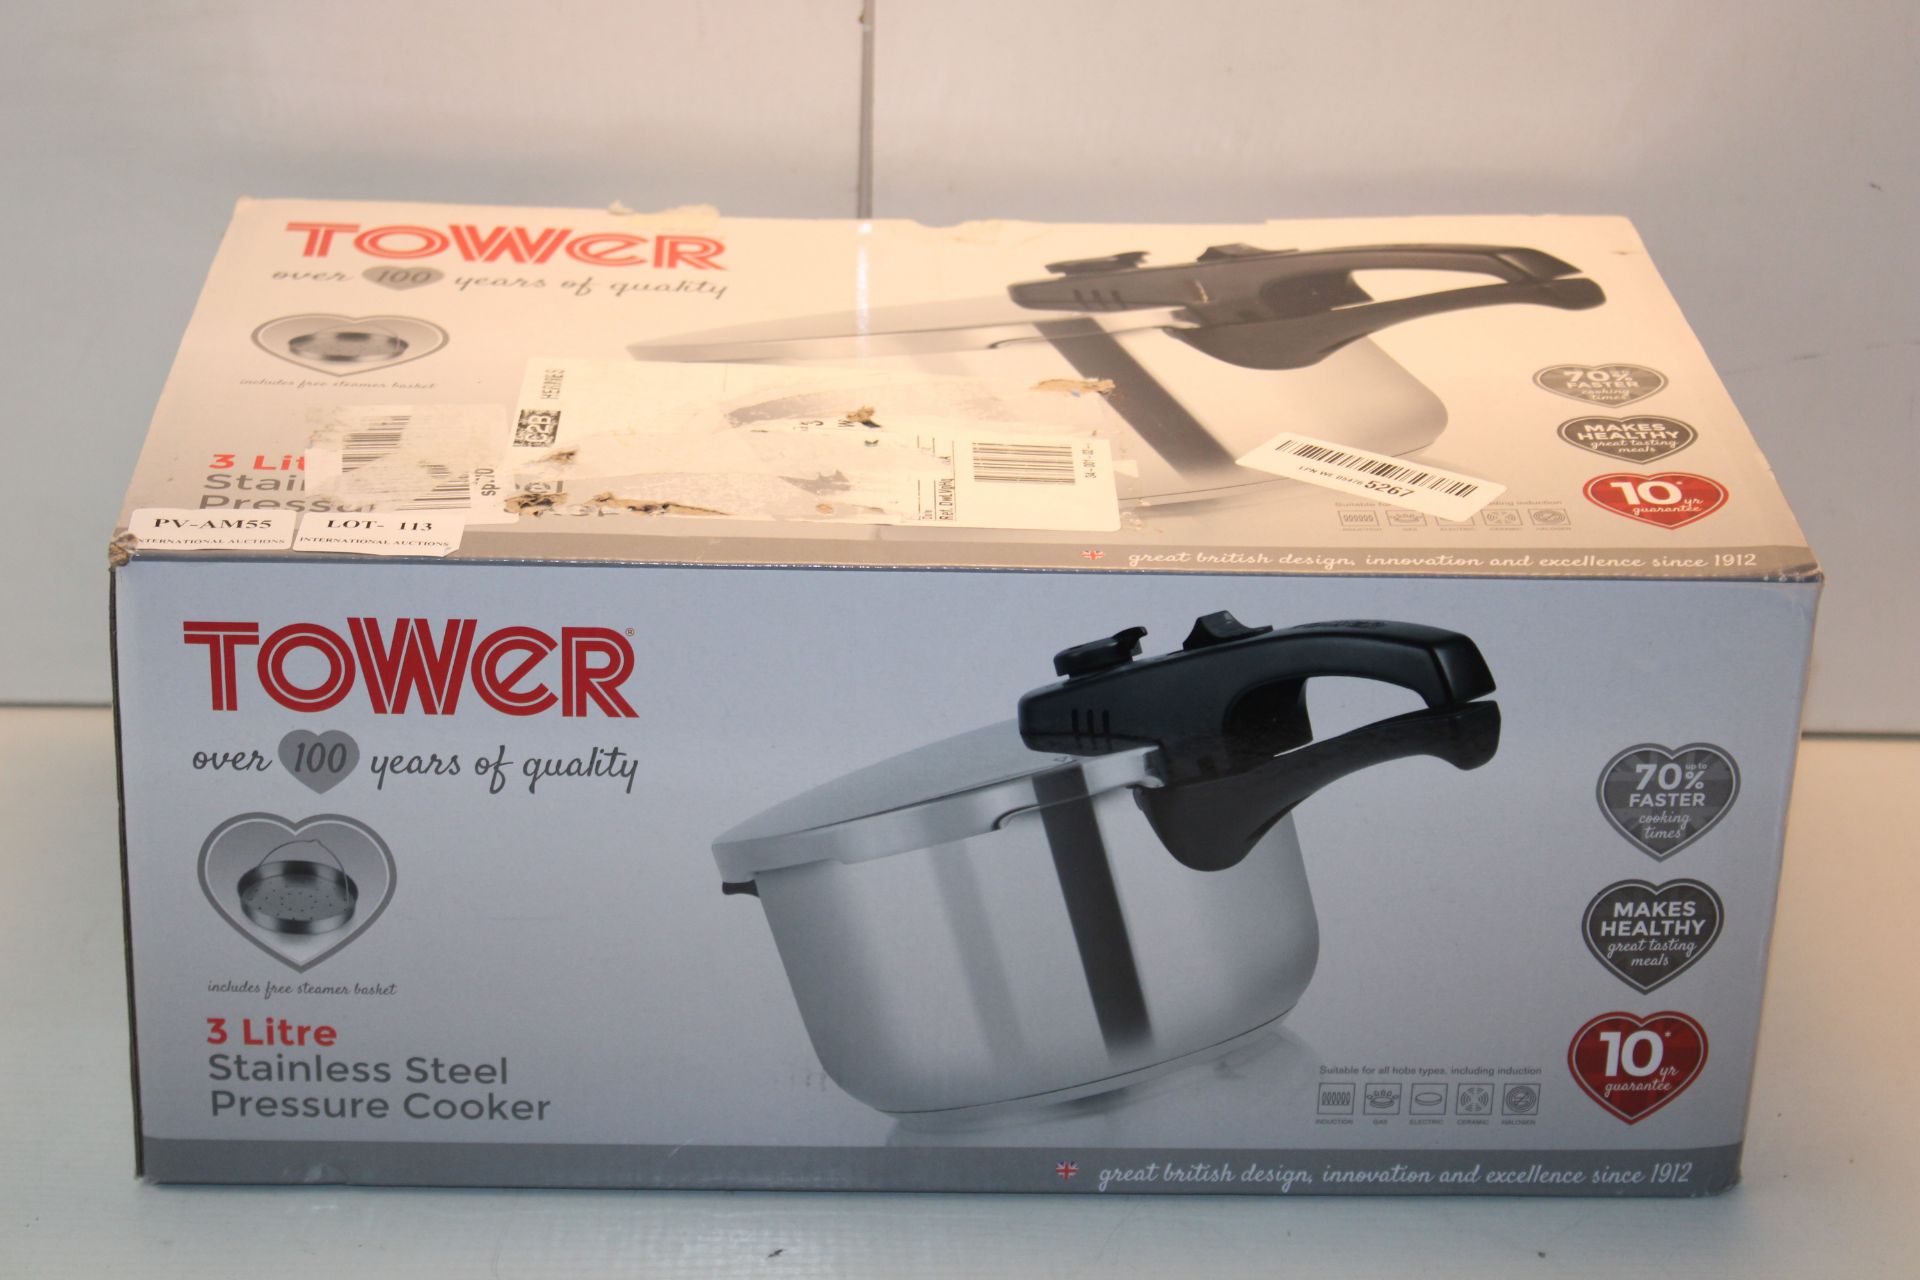 BOXED TOWER 3 LITRE STAINLESS STEEL PRESSURE COOKER RRP £34.00Condition ReportAppraisal Available on